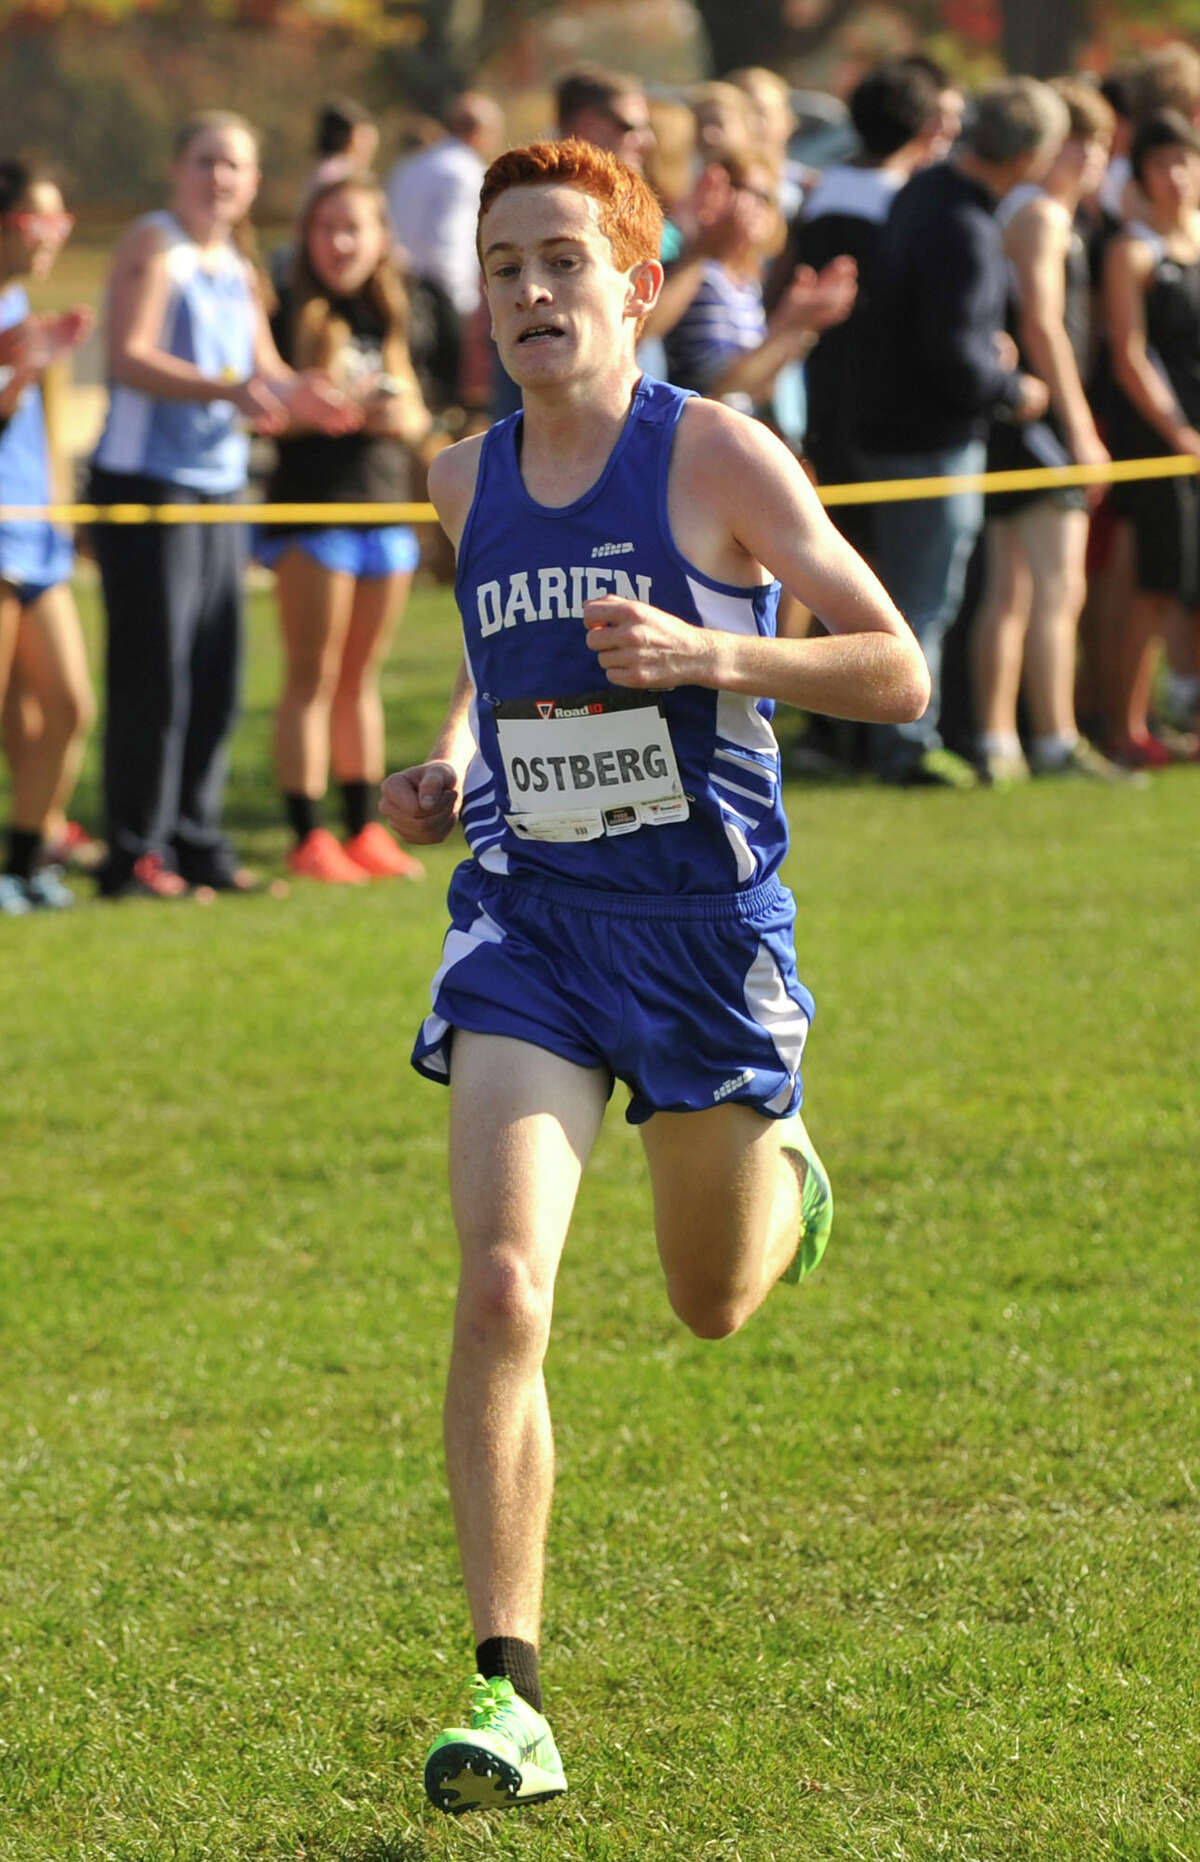 Darien's Alex Ostberg competes in the FCIAC varsity boys cross country championships at Waveny Park in New Canaan on Thursday, Oct. 17, 2013.